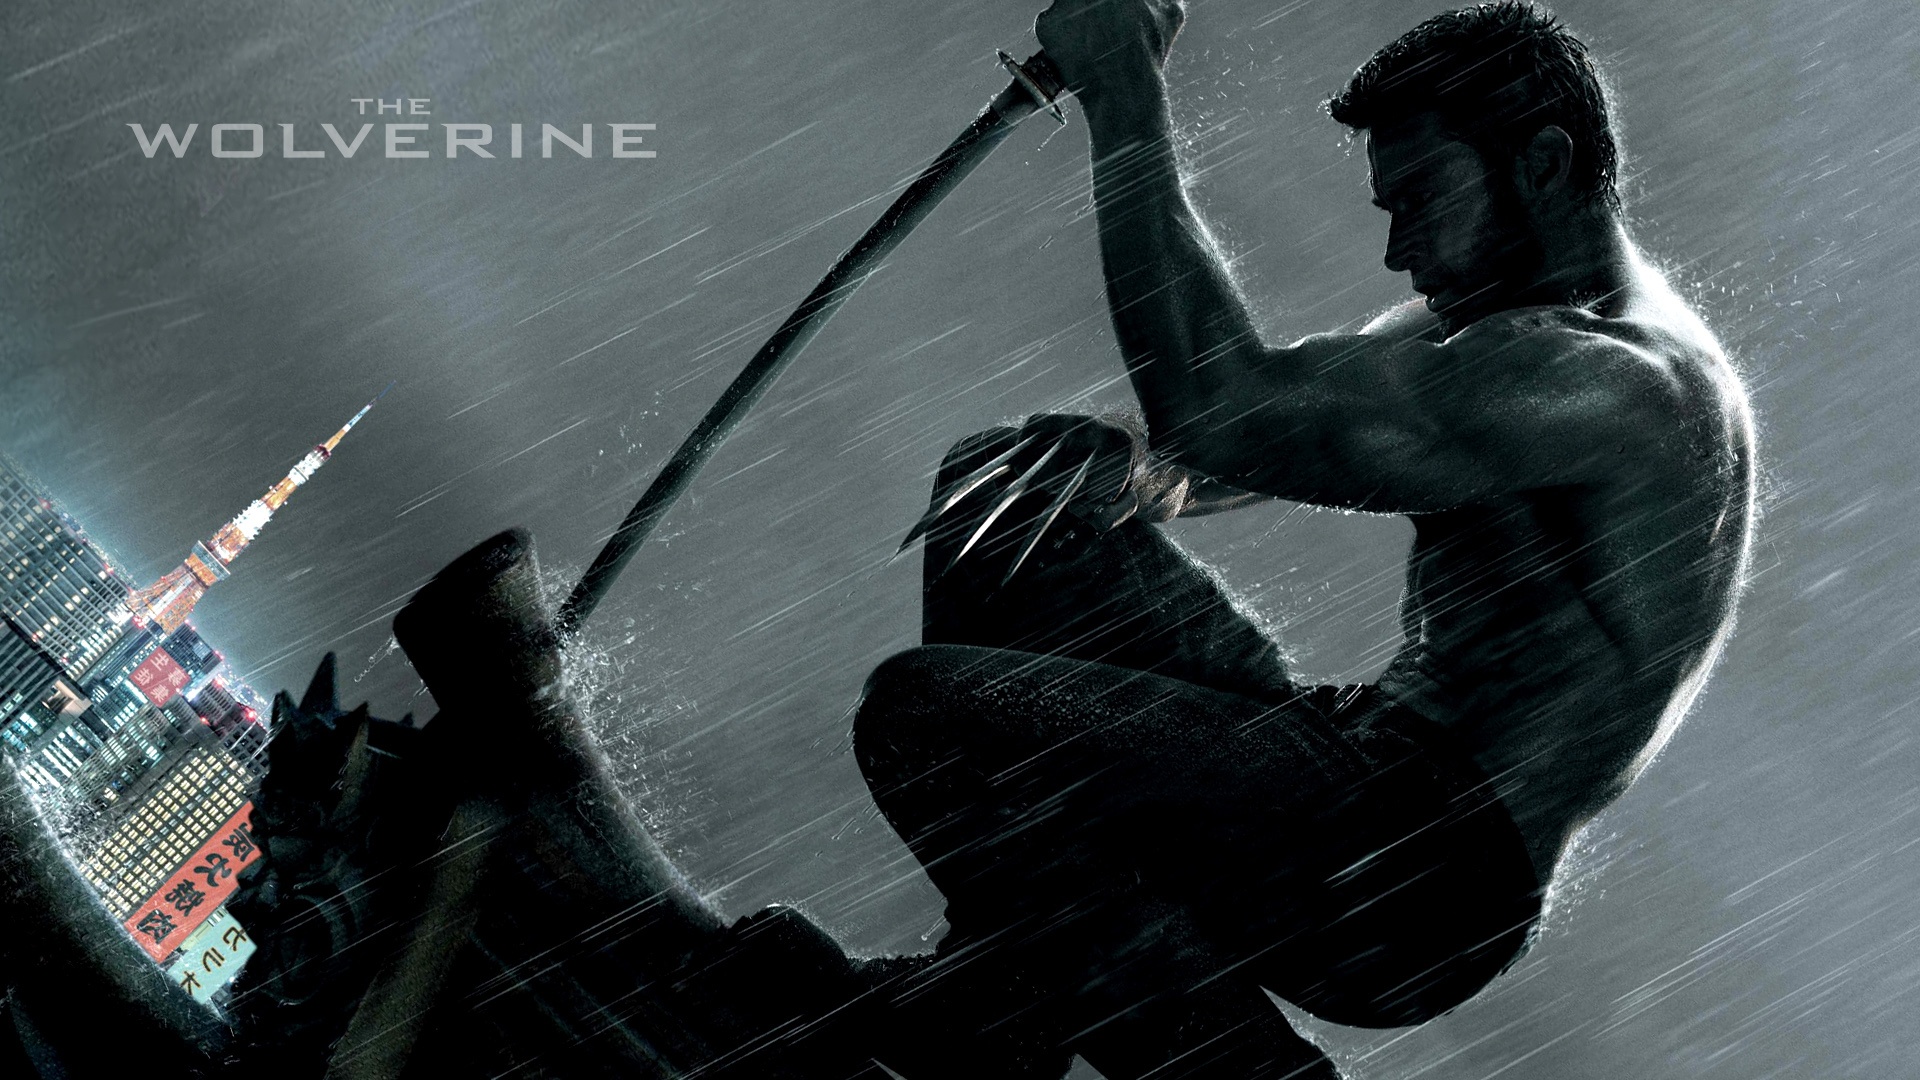 Wolverine HD Wallpaper In High Resolution For Get